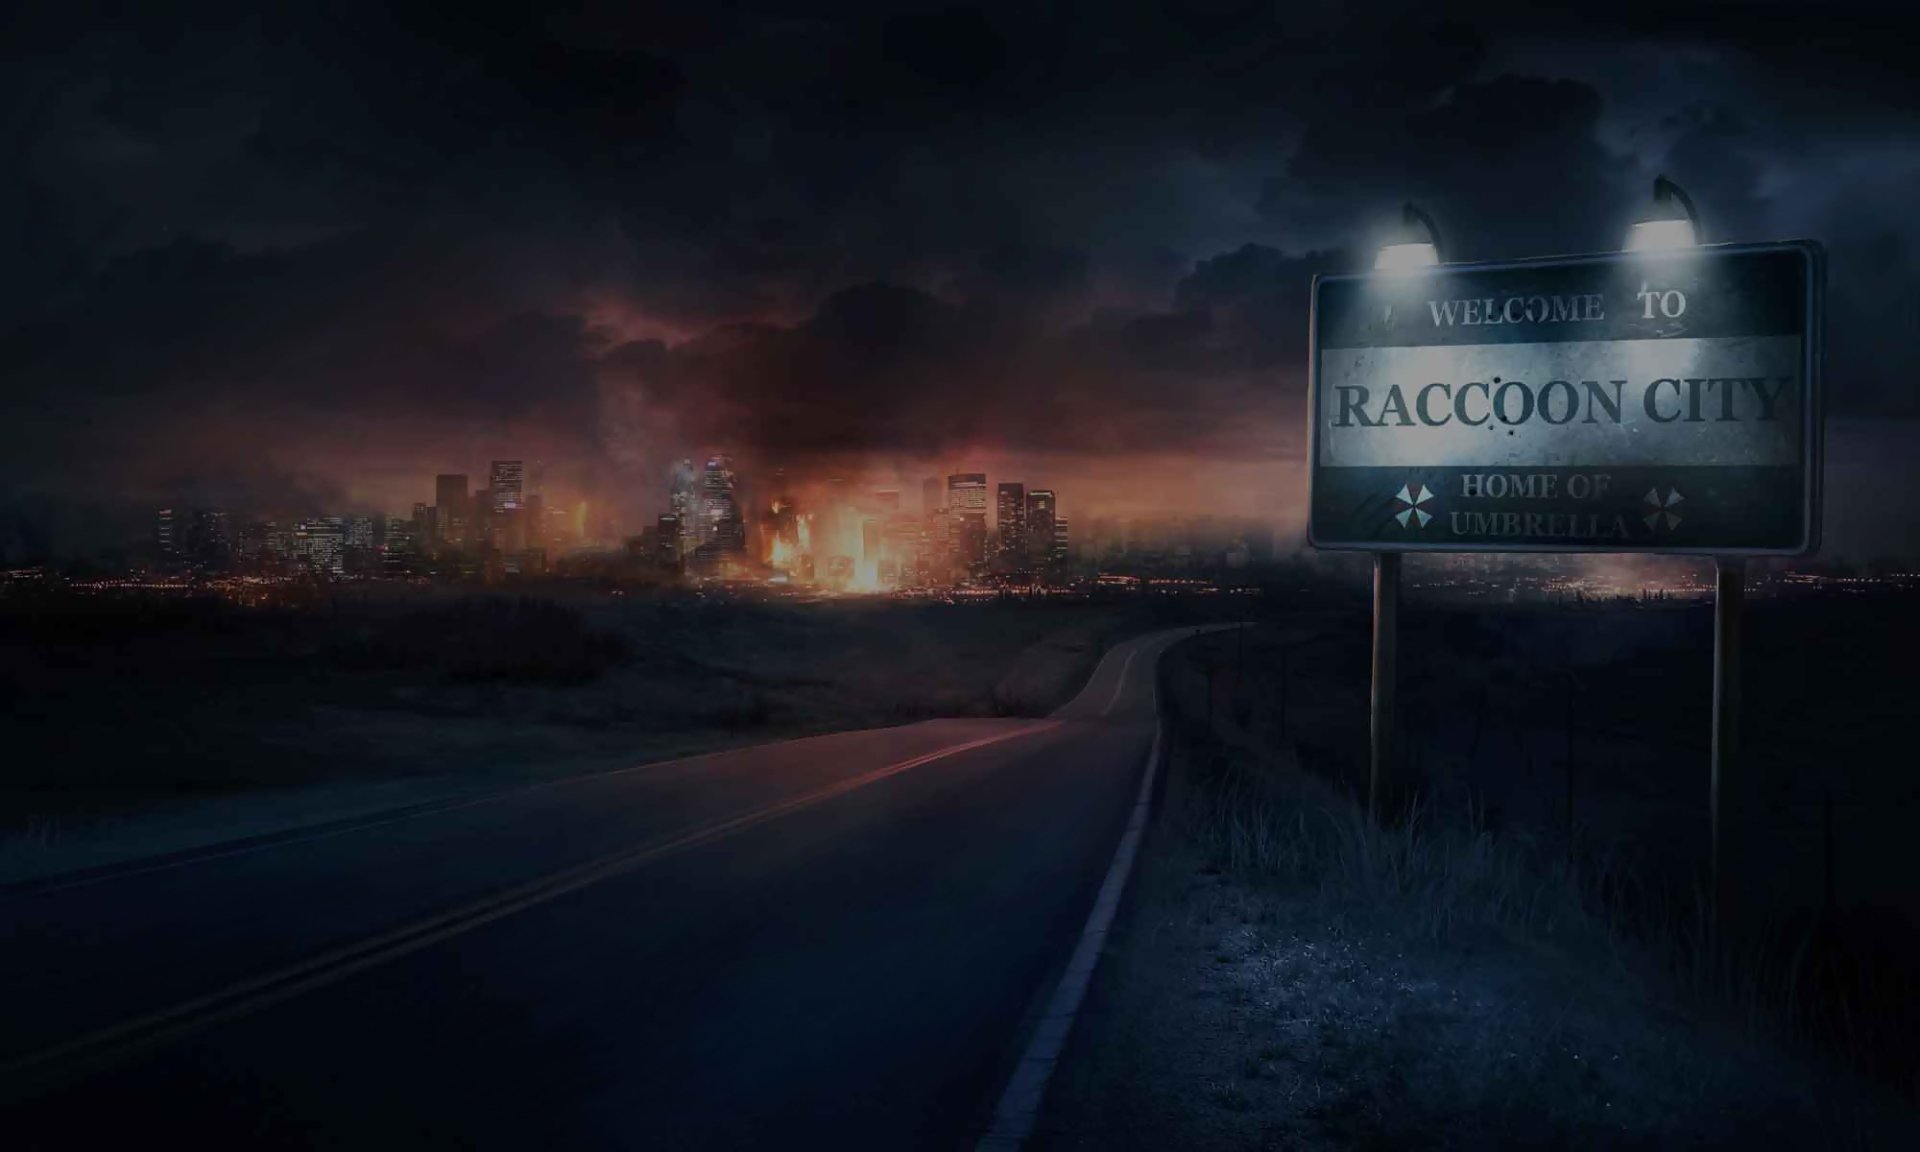 resident evil operation raccoon city wallpaper 1080p Wallpapers